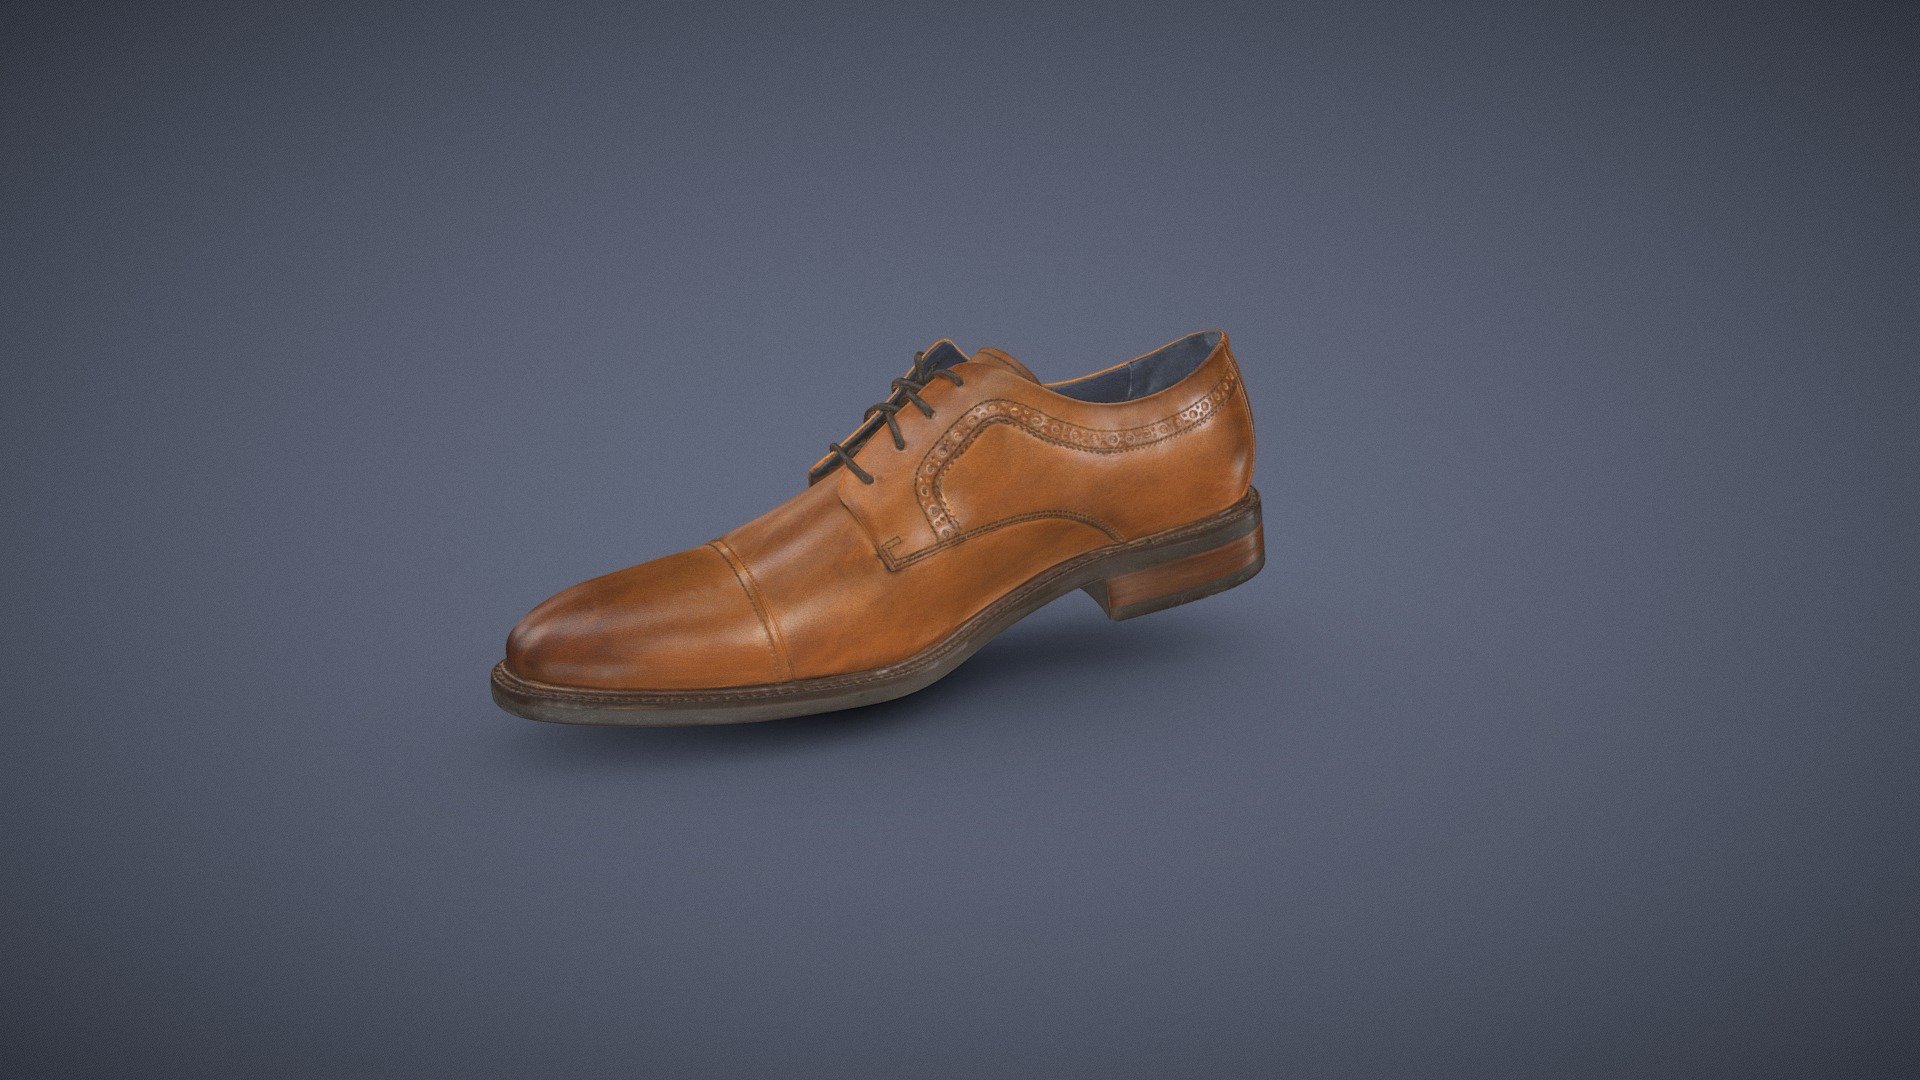 Scan of Dress shoe using the Artec Space Spider, this was the second of the two so it was much easier and went quite a bit quicker, about 15 mins total to scan, process and export. All told pretty happy with the data. For more information on Artec 3D scanners, full color 3d Scanning and scan services please visit www.Reality3D.net or email us at info@reality3d.net - Dress Shoe-Right - Download Free 3D model by Reality_3D (@Sbell_Reality3D) 3d model